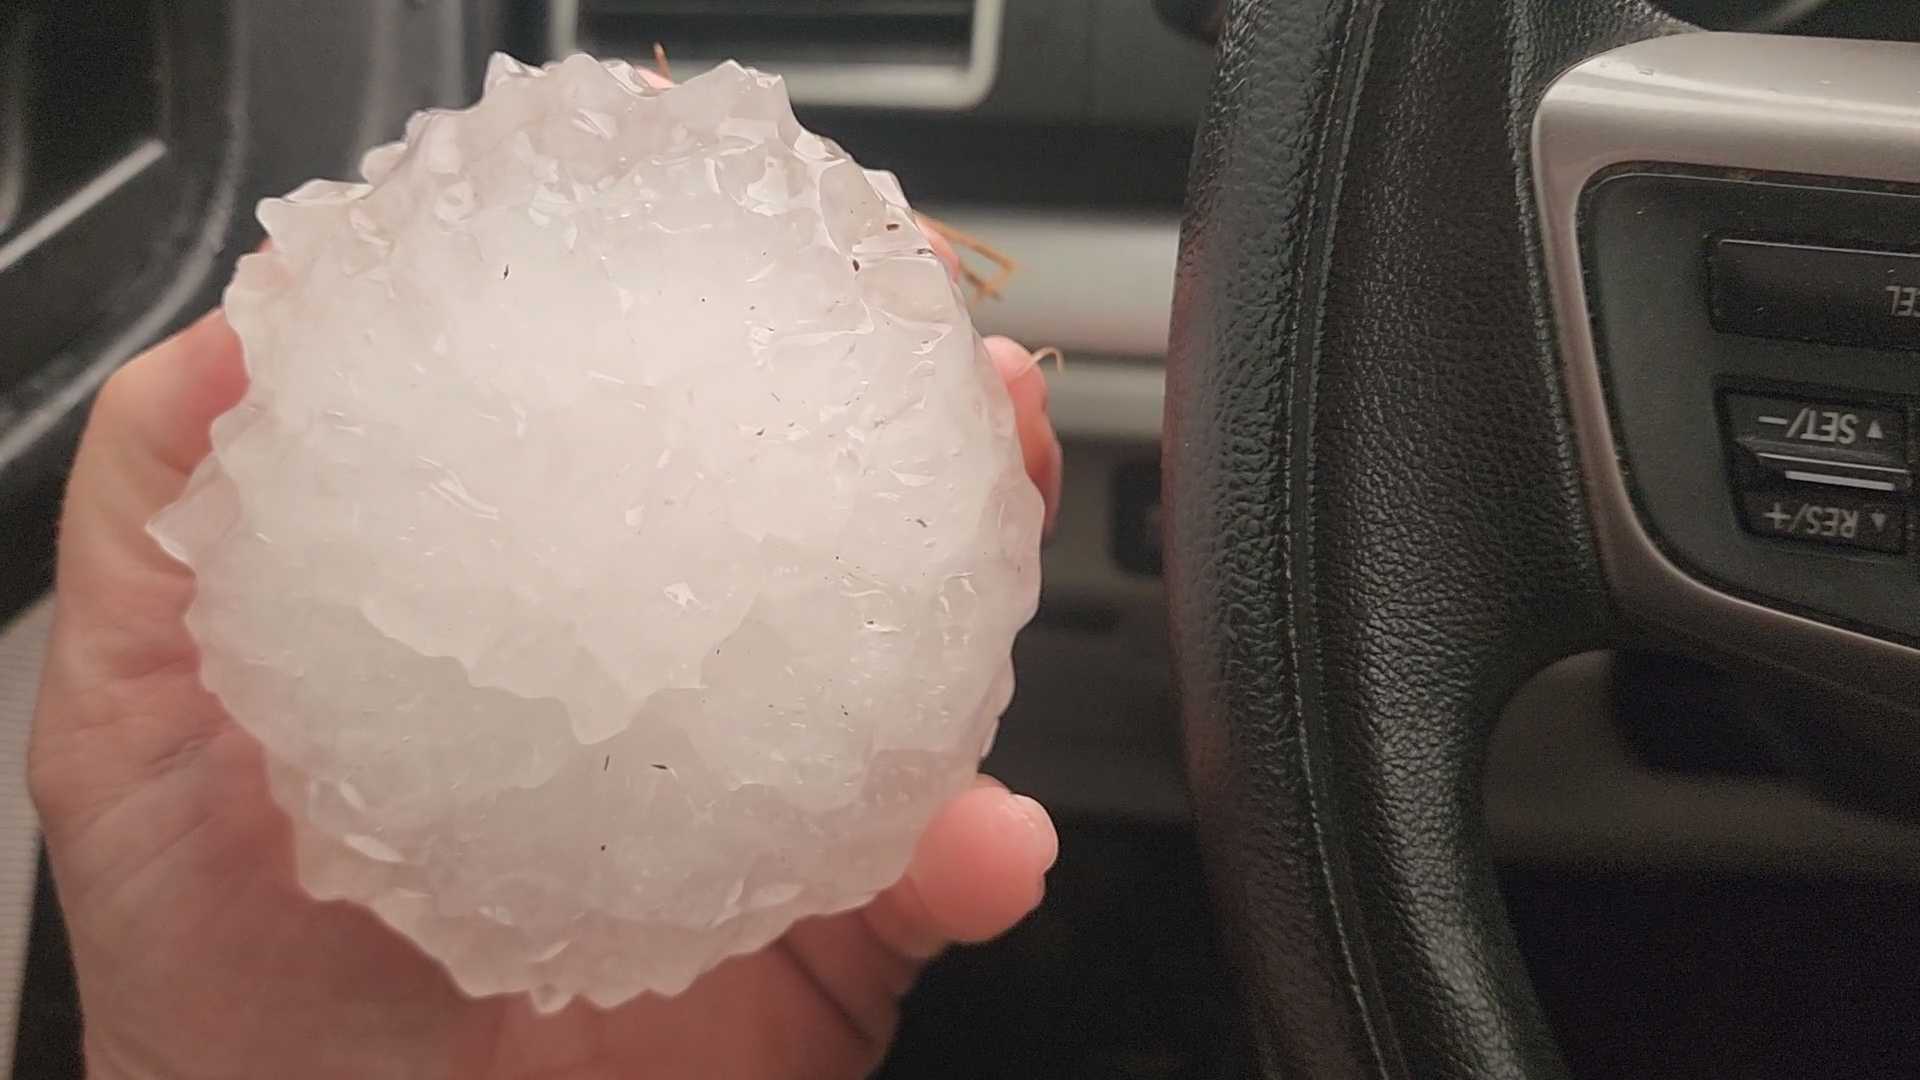 Grapefruit-sized hail in Gove County